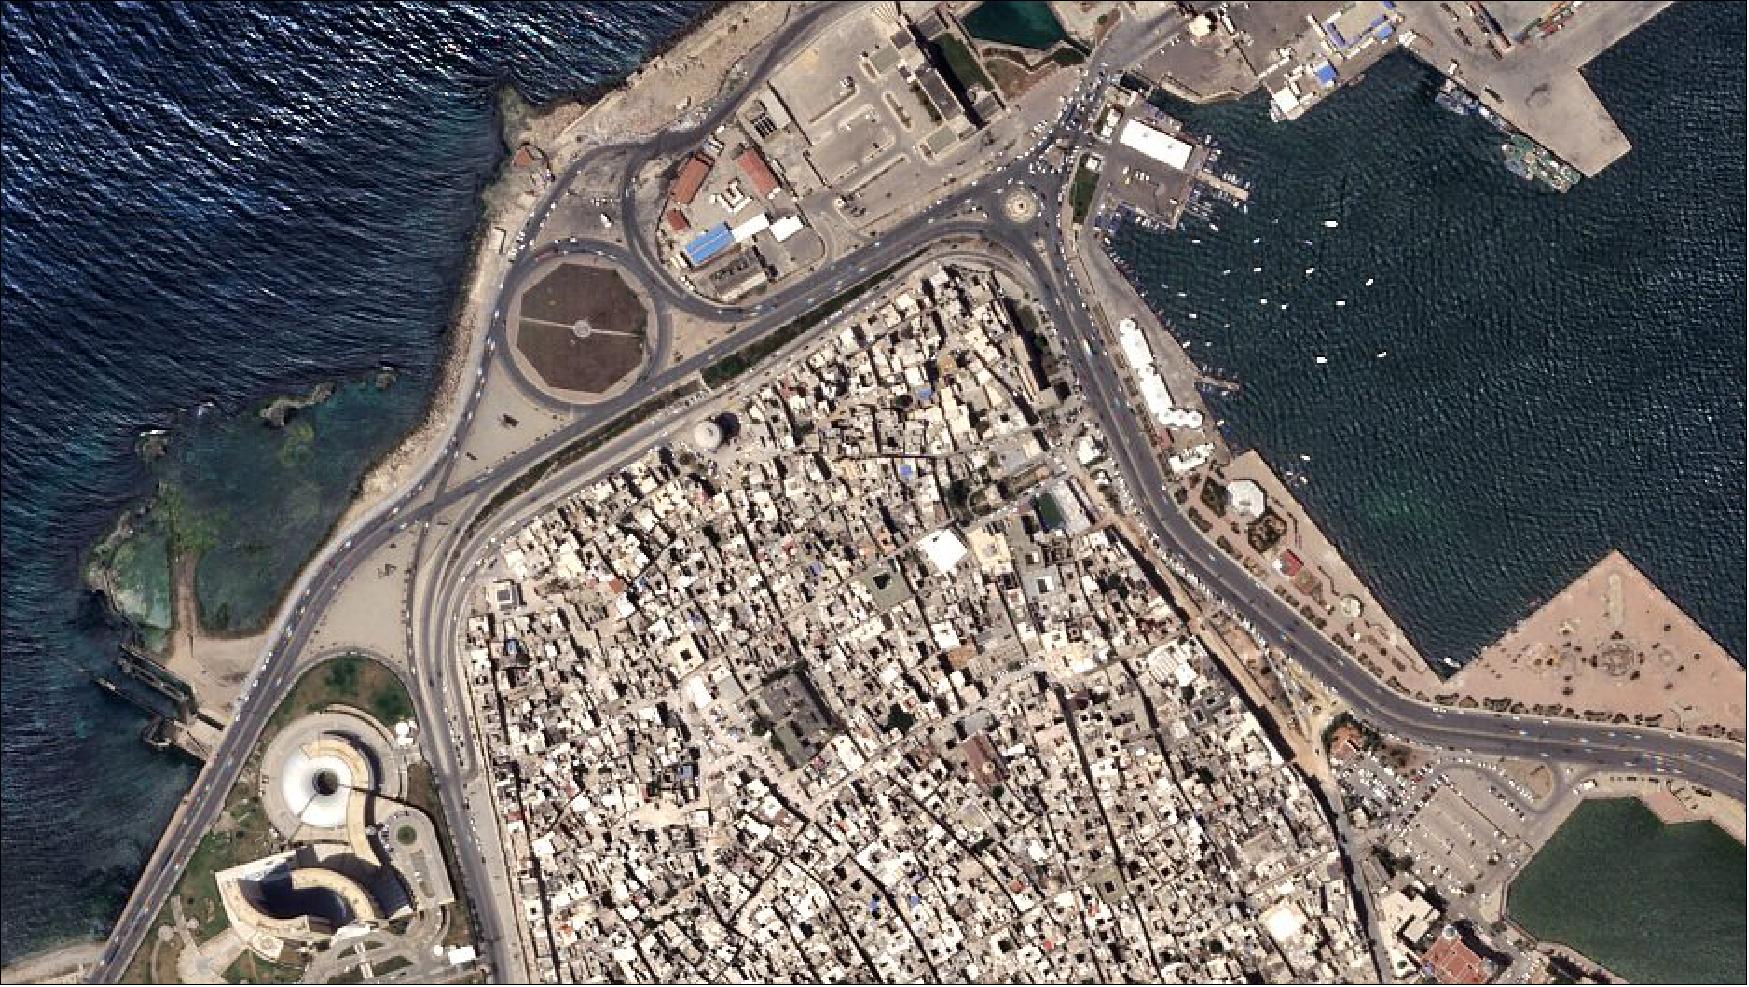 Figure 15: The Old City of Tripoli, Libya imaged at 50 cm per pixel from an altitude of 456 km (image credit: © 2020, Planet Labs Inc., All Rights Reserved)